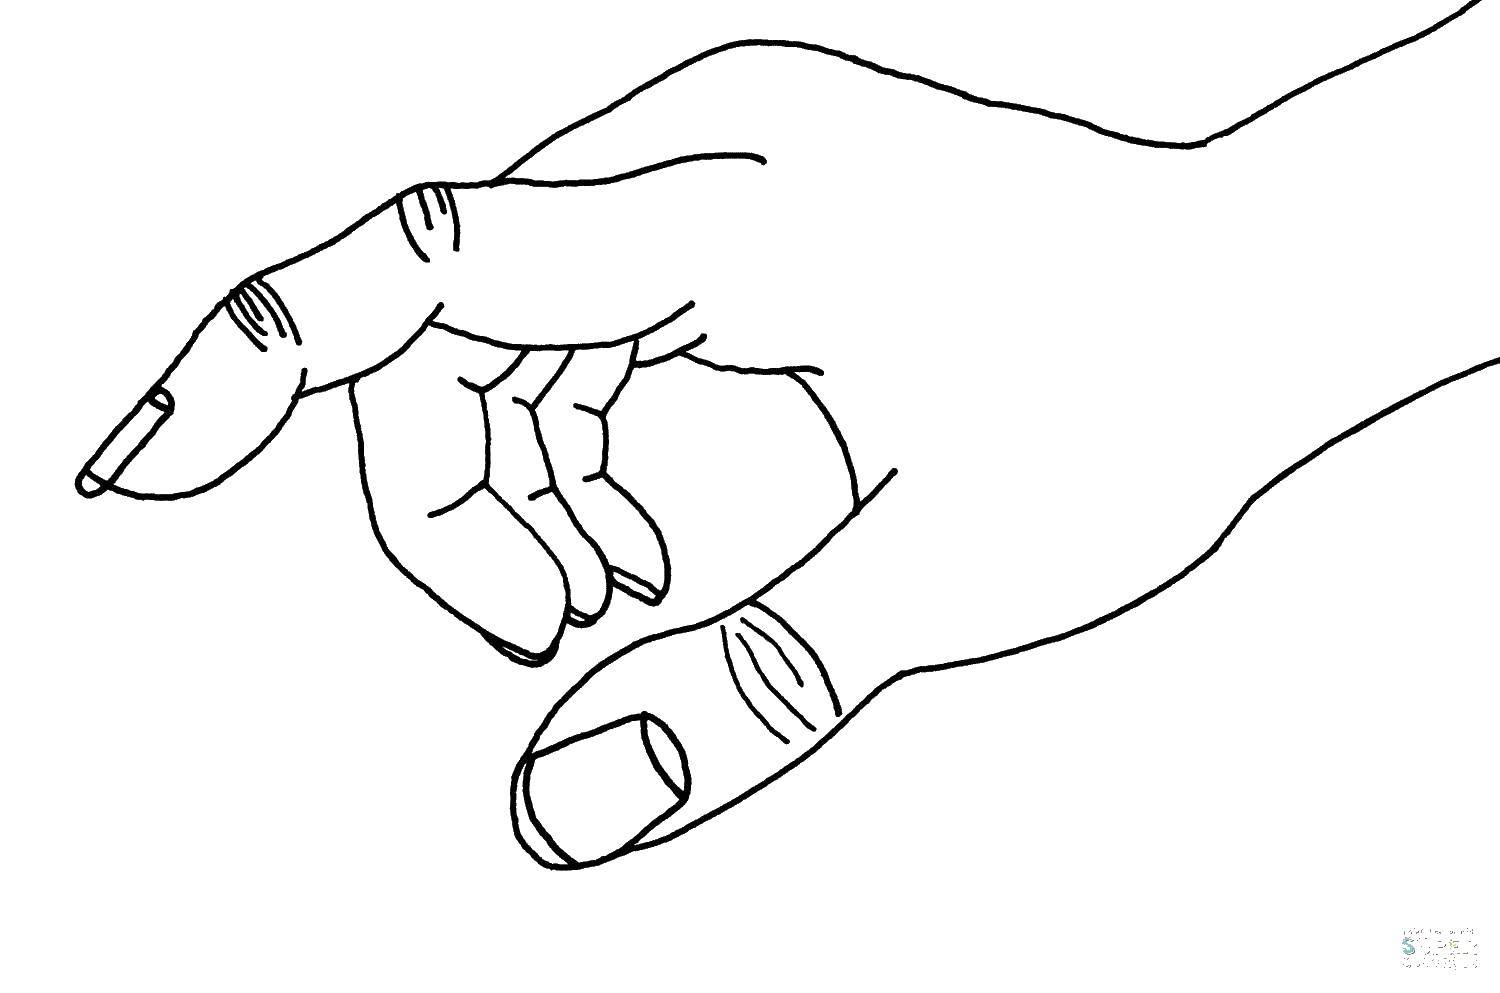 Coloring Fingers and nails. Category The contour of the hands and palms to cut. Tags:  fingers, nails, palm.